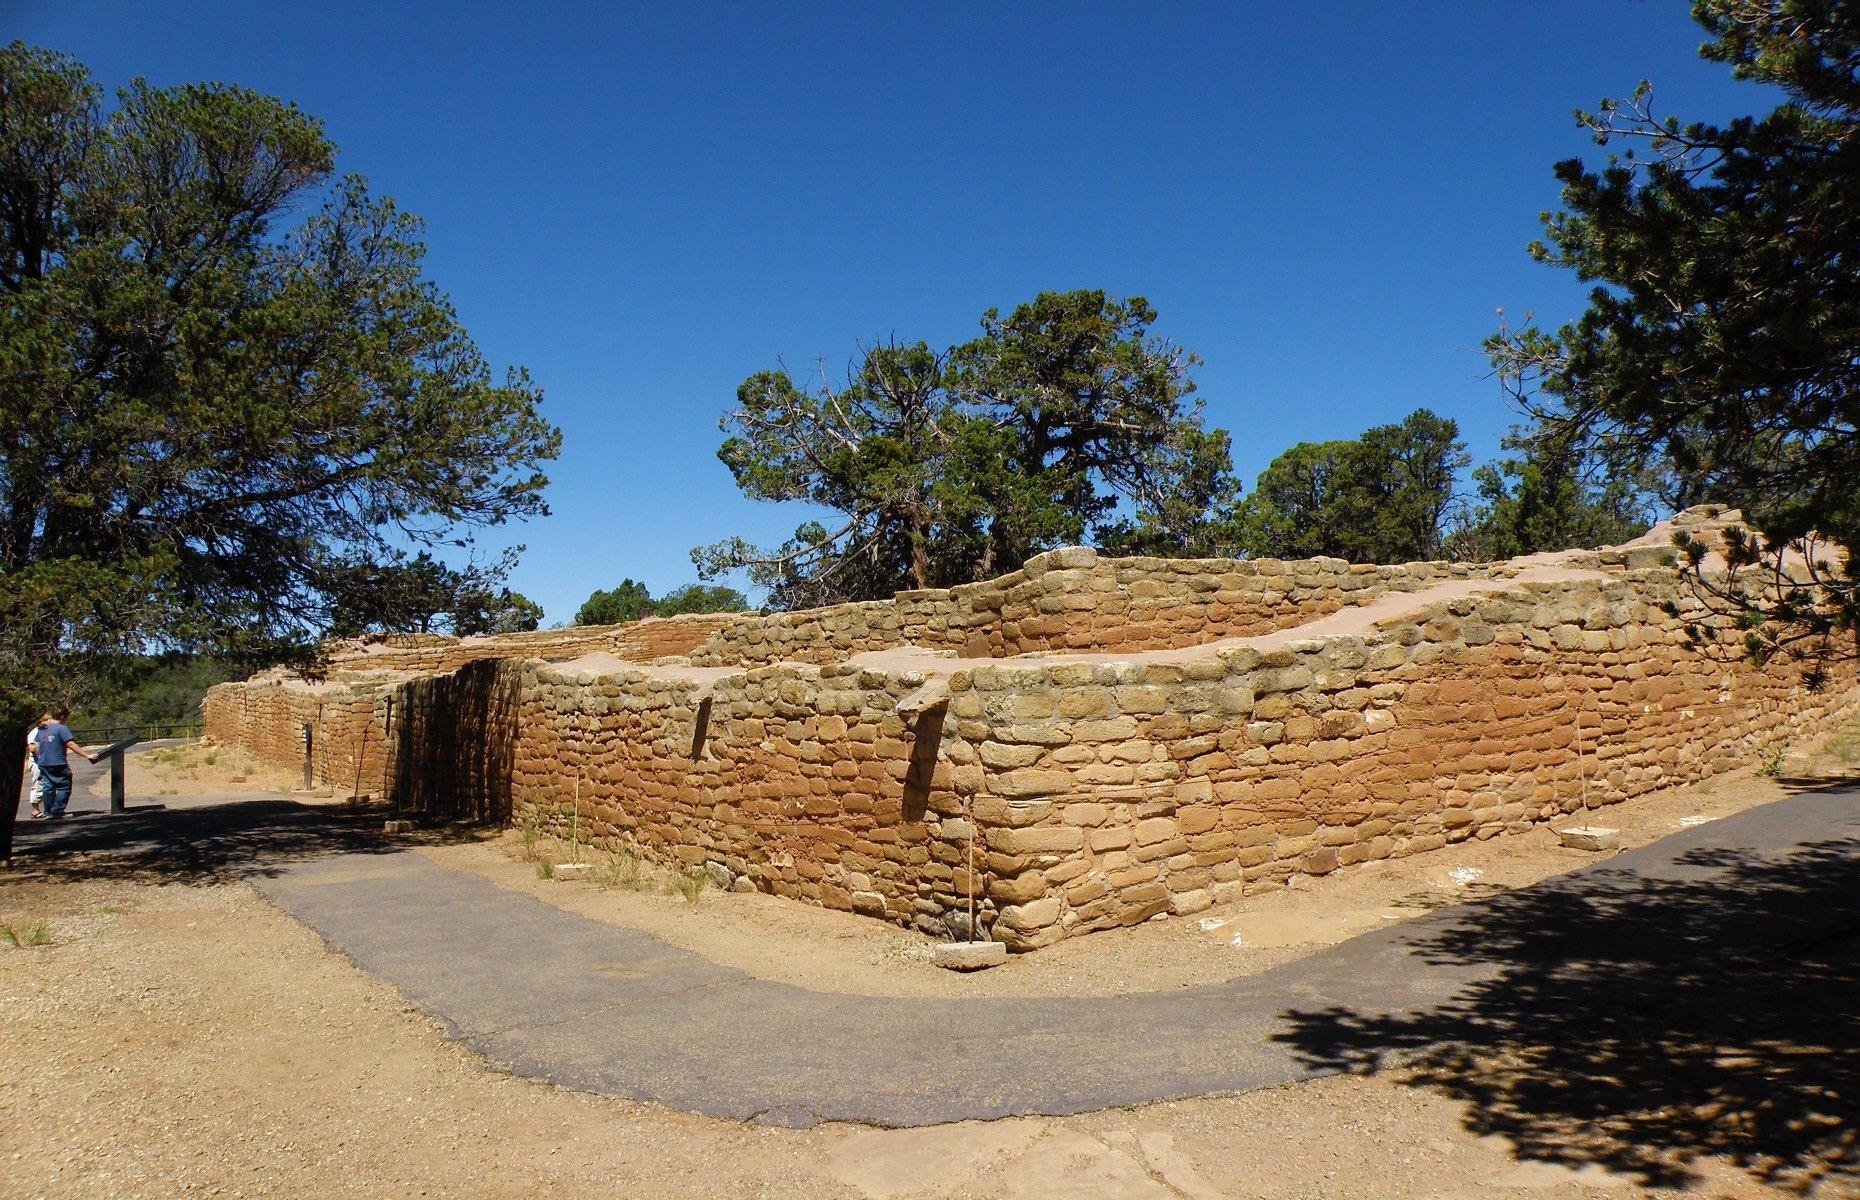 <p>The sun temple is one of the largest ceremonial buildings built by the Ancestral Puebloans. It’s also thought to have been an astronomical observatory aligned to the sunset during the winter solstice, which can be viewed from a platform at the south end of the Cliff Palace. It also aligns with the lunar standstill: when the moon reaches its northernmost or southernmost point during the course of a month.</p>